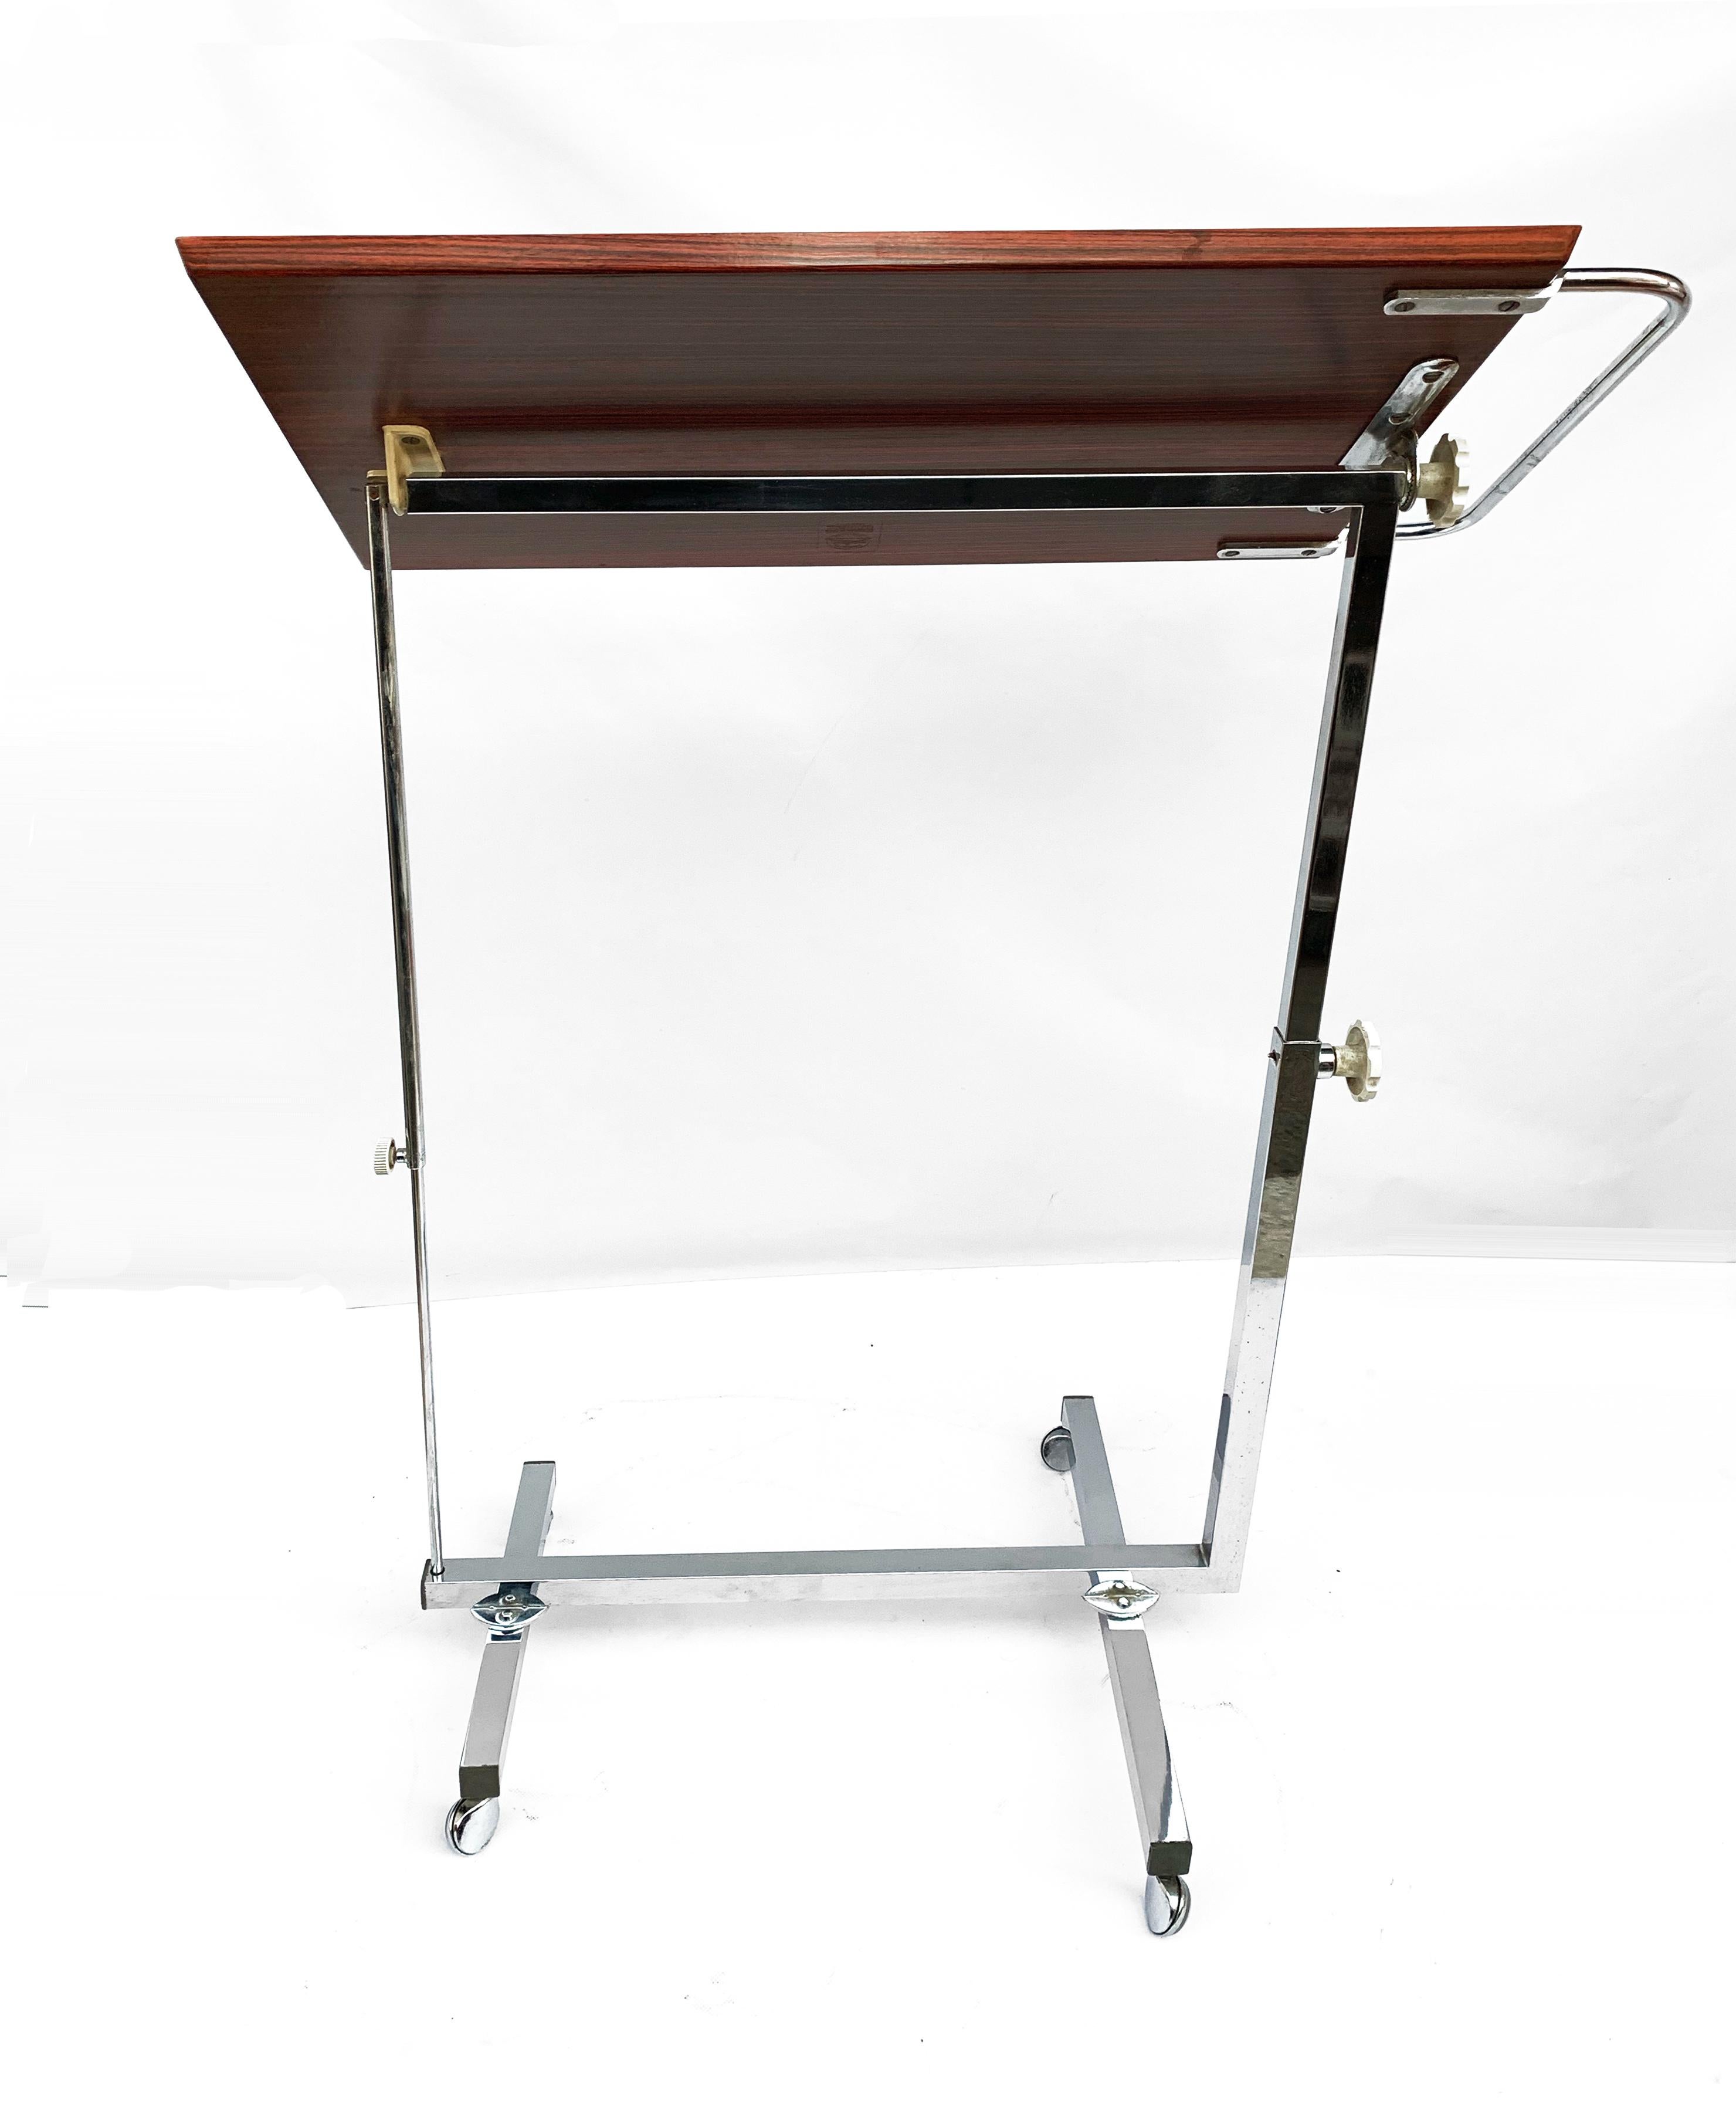 Vintage Service Trolley by Variett Bremshey for Bremshey & Co., Germany, 1966 For Sale 3